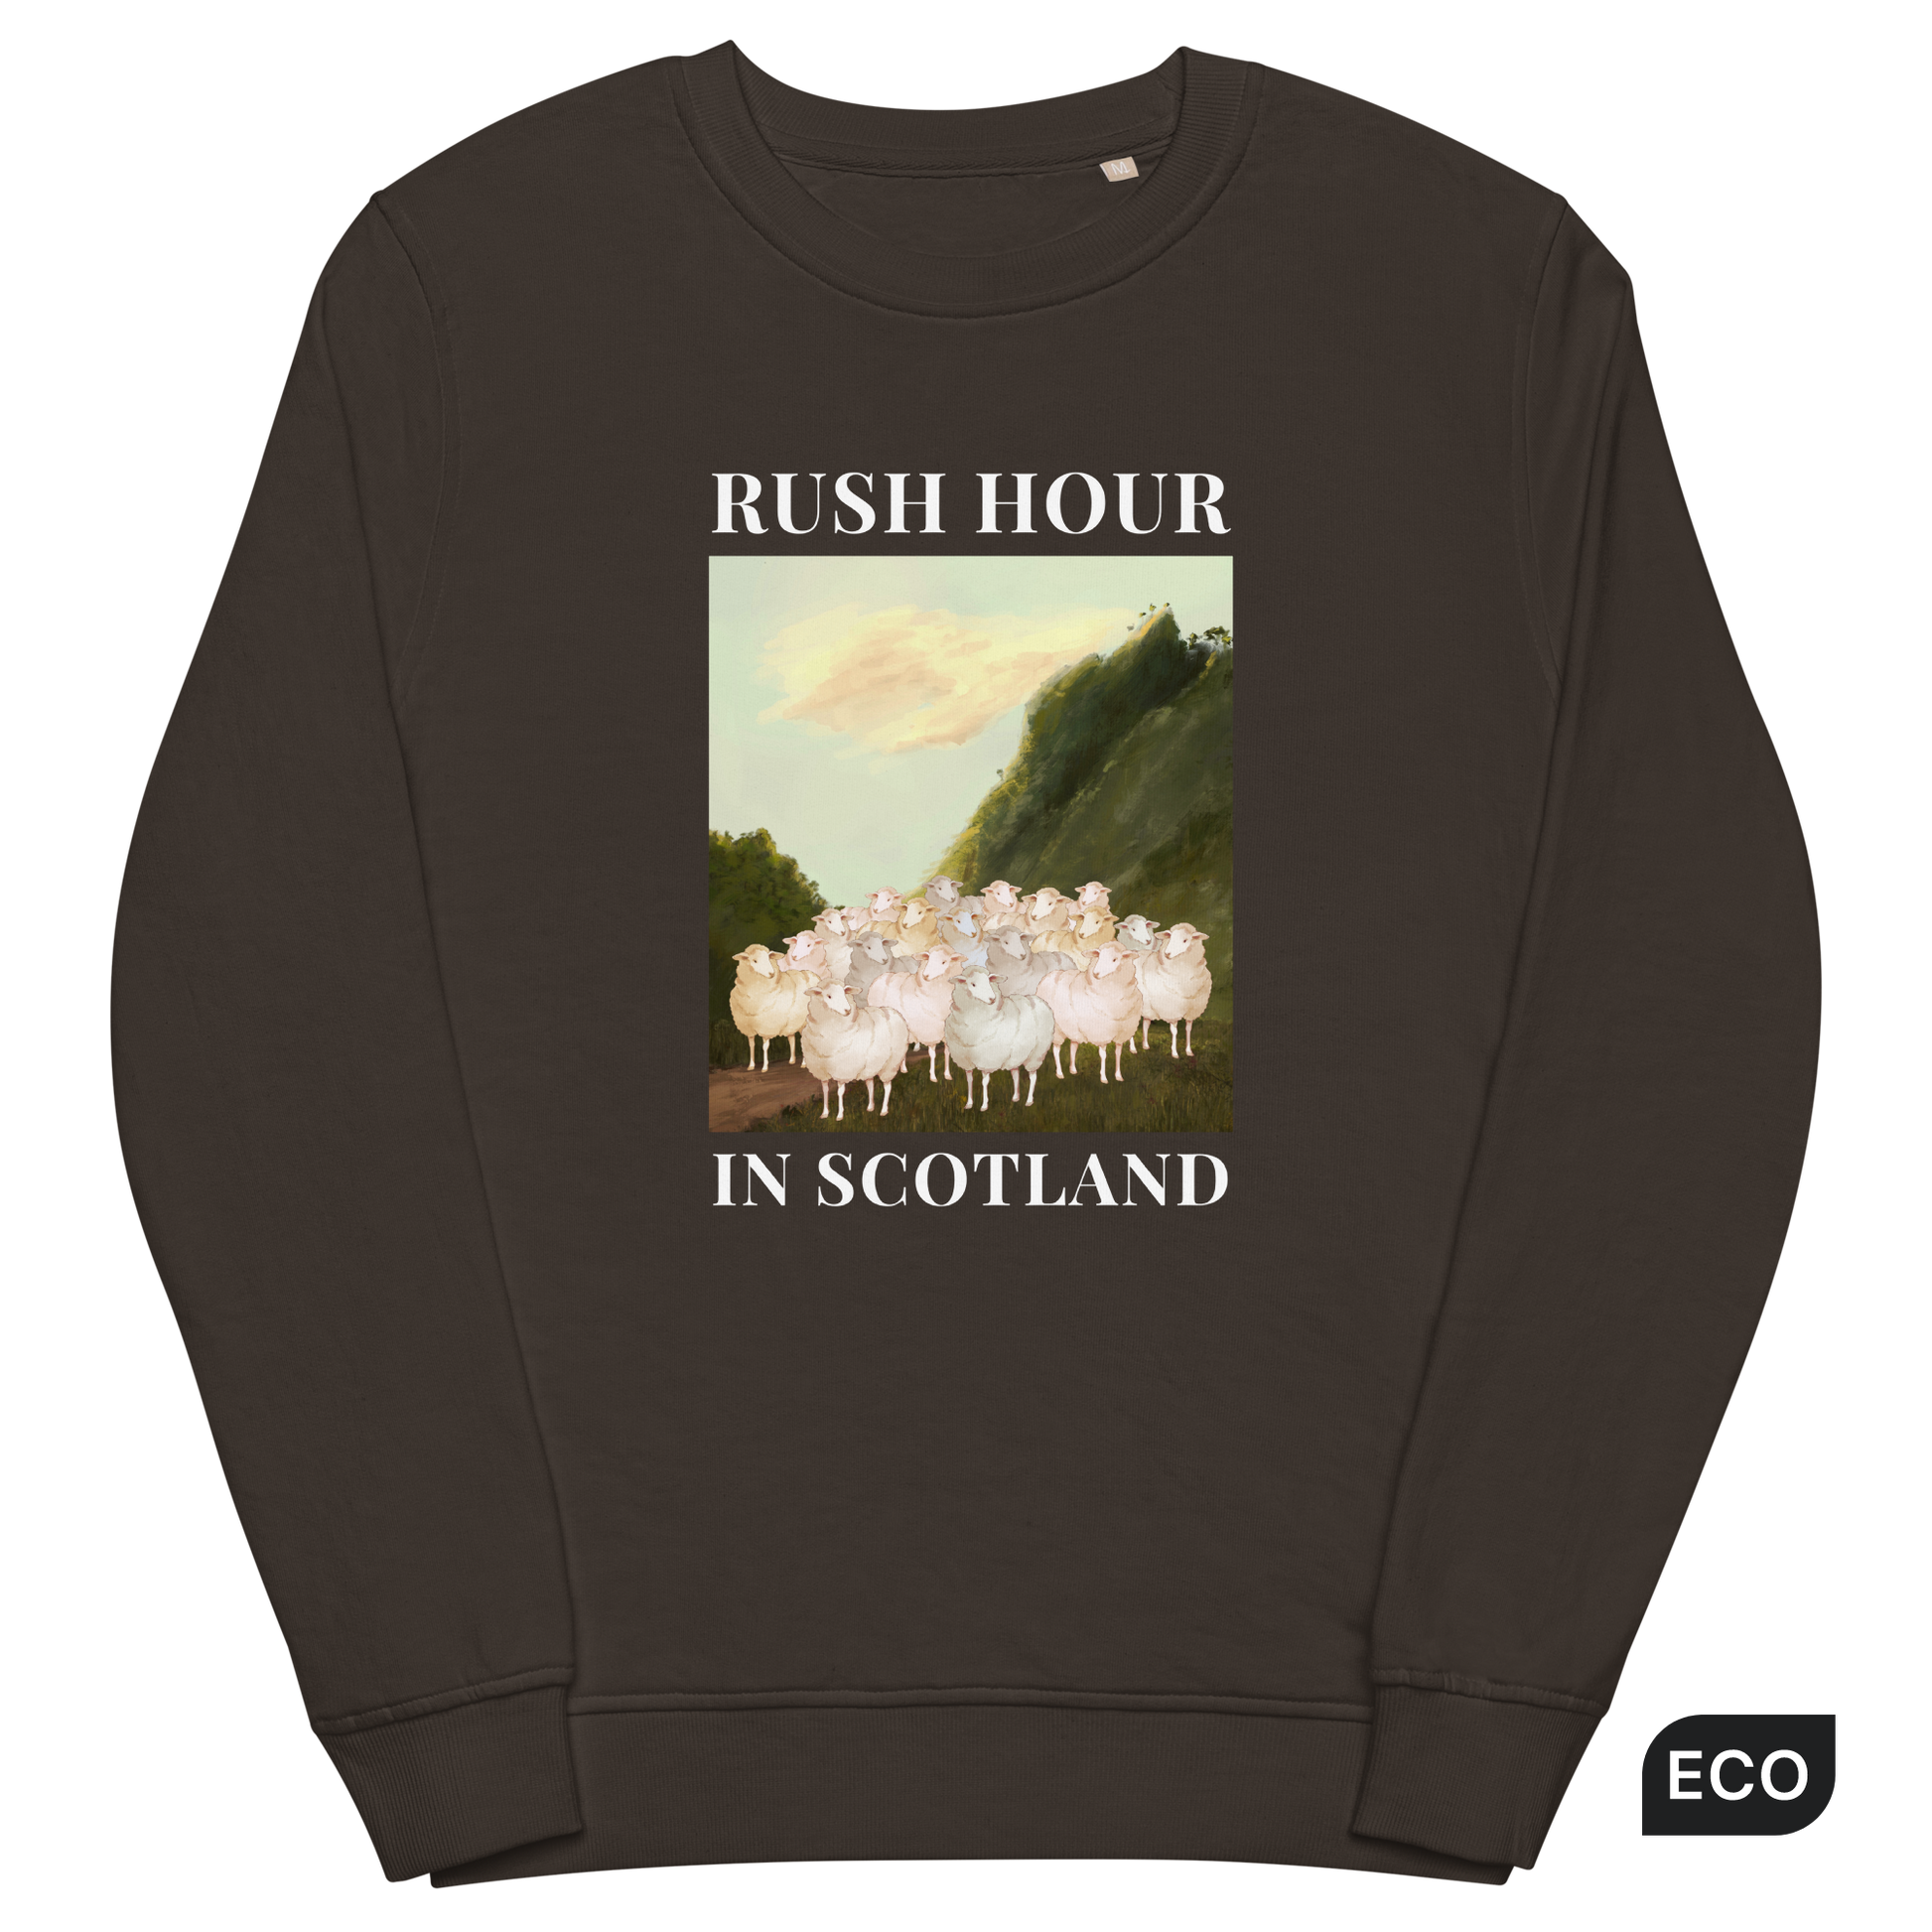 Deep Charcoal Grey Sheep Organic Sweatshirt featuring a comical Rush Hour In Scotland graphic on the chest - Artsy & Funny Graphic Sheep Sweatshirts - Boozy Fox